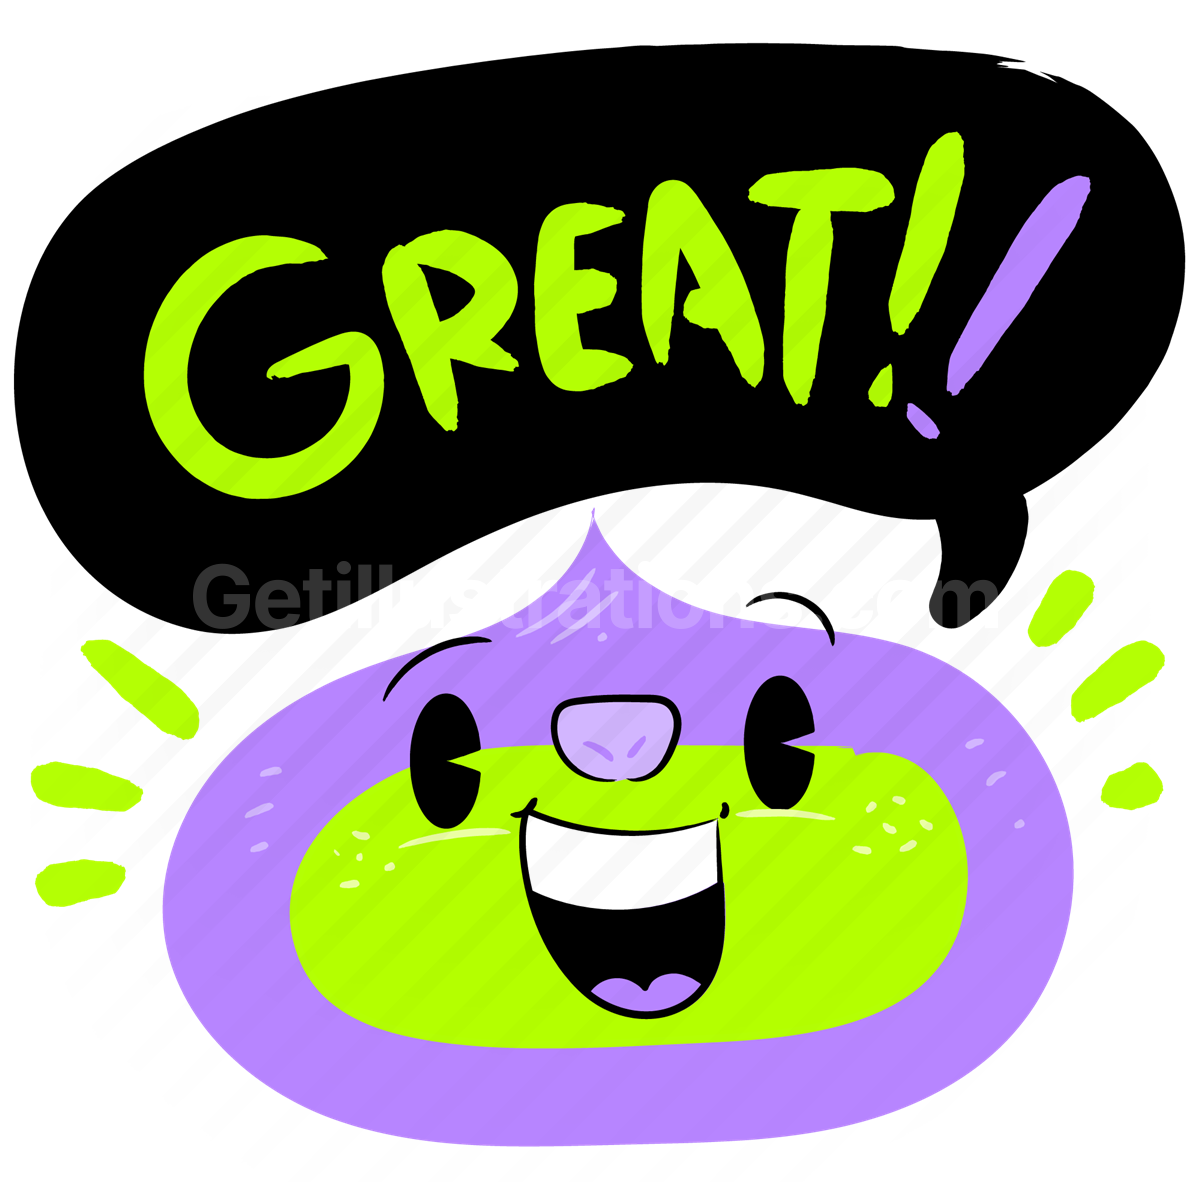 sticker, face, character, smiley, great, greeting, positive, smile